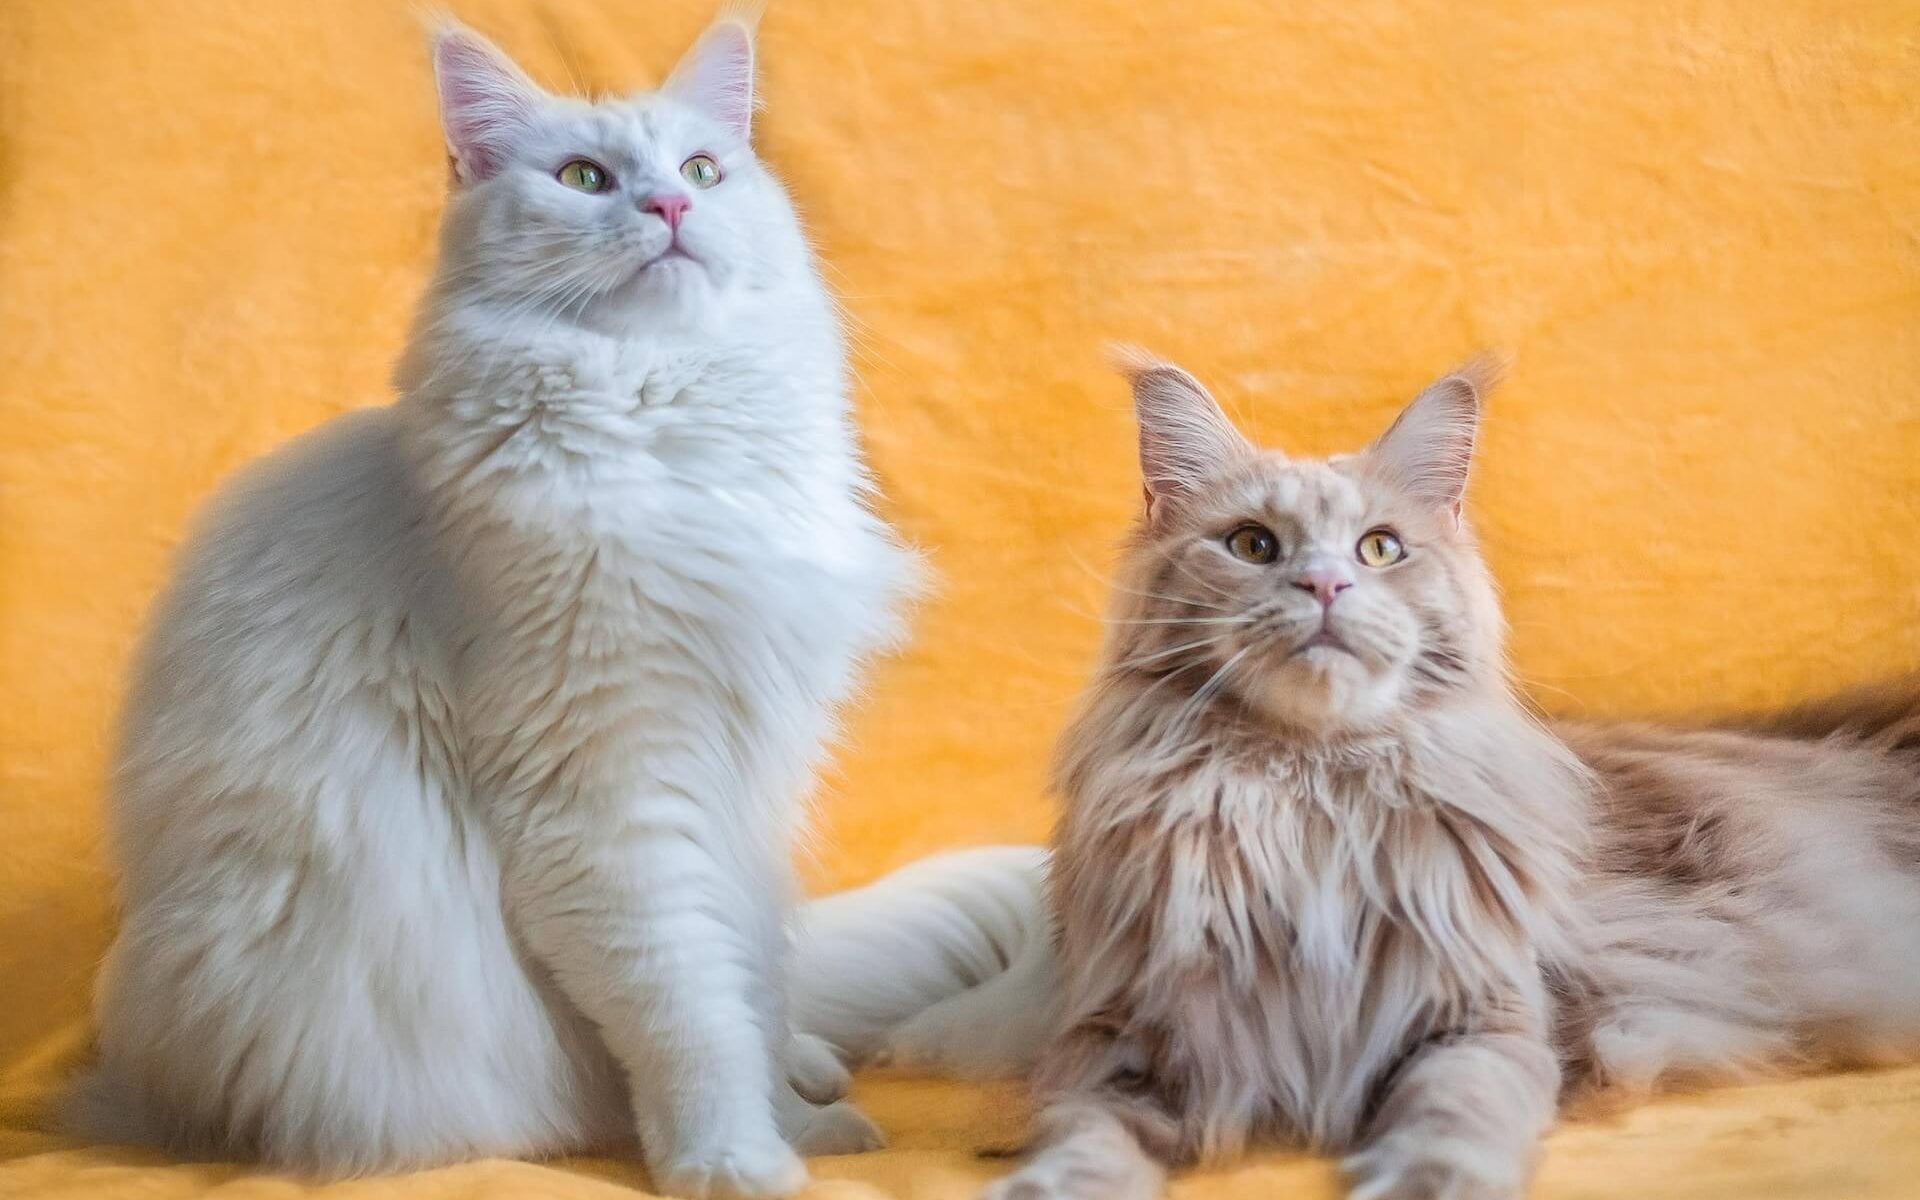 Two fluffy Maine Coon cats sitting together.